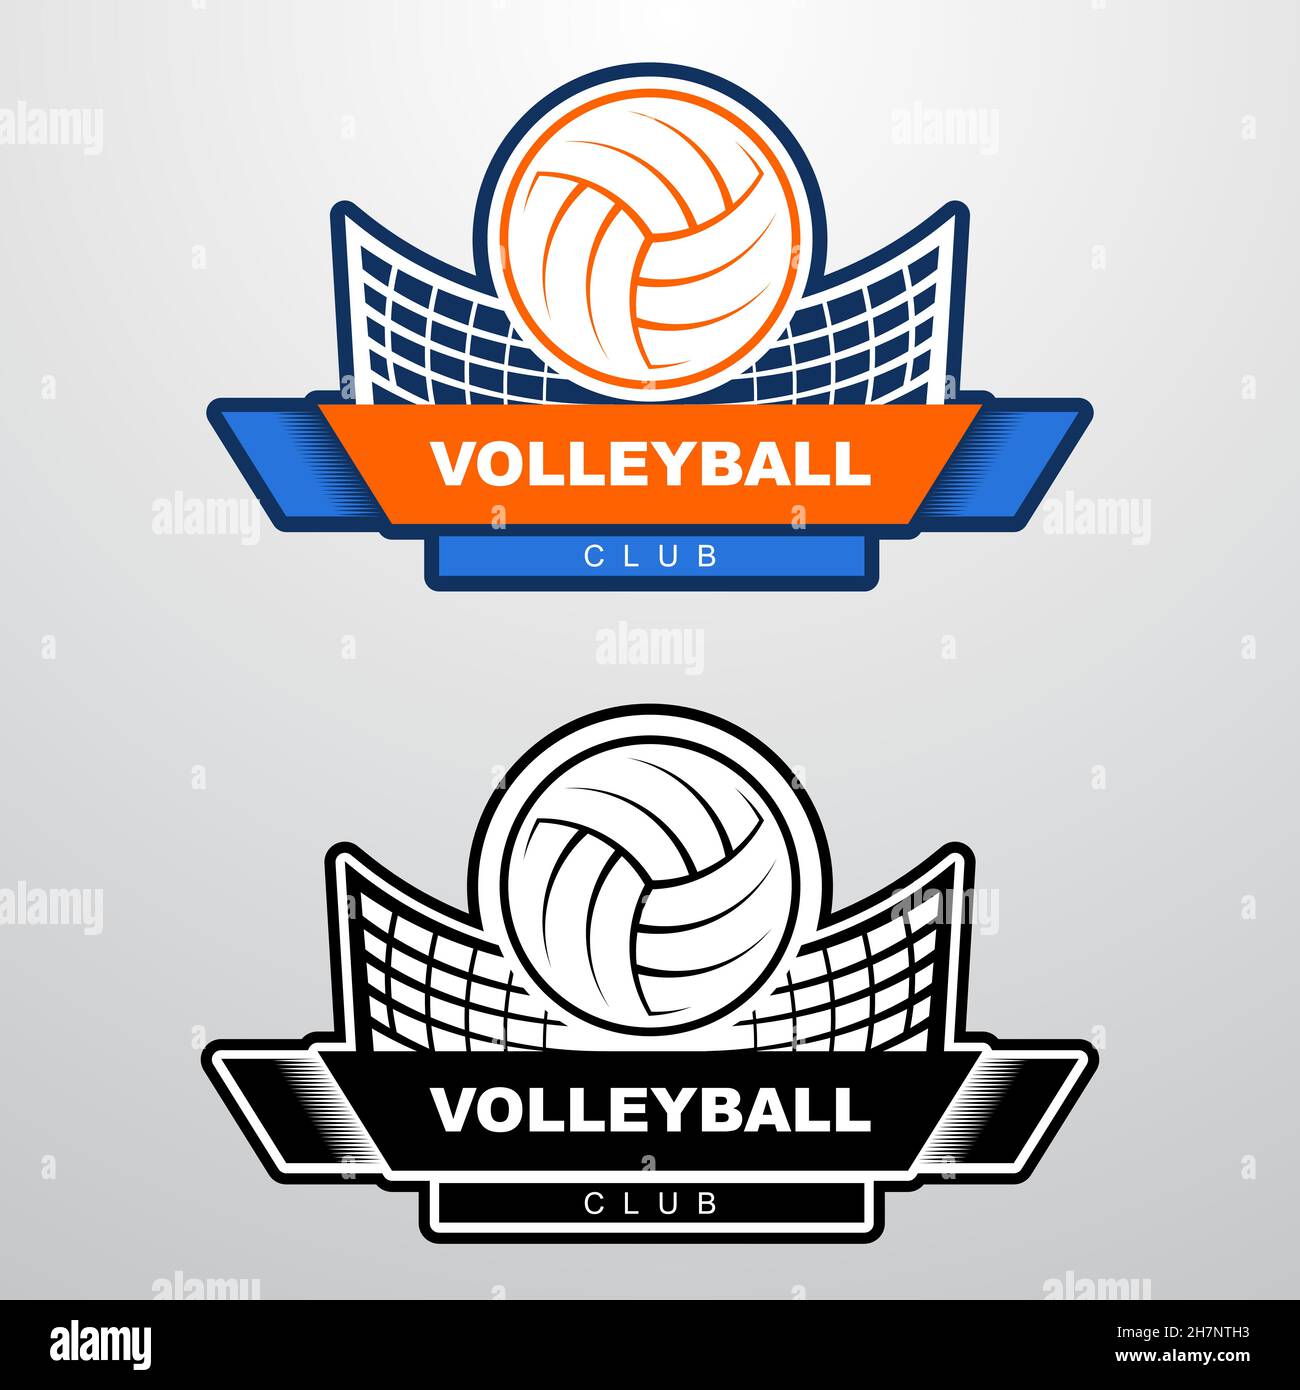 Volleyball logo template with ball flying over the net. Orange and blue sport logo template with flying ball. Stock Vector